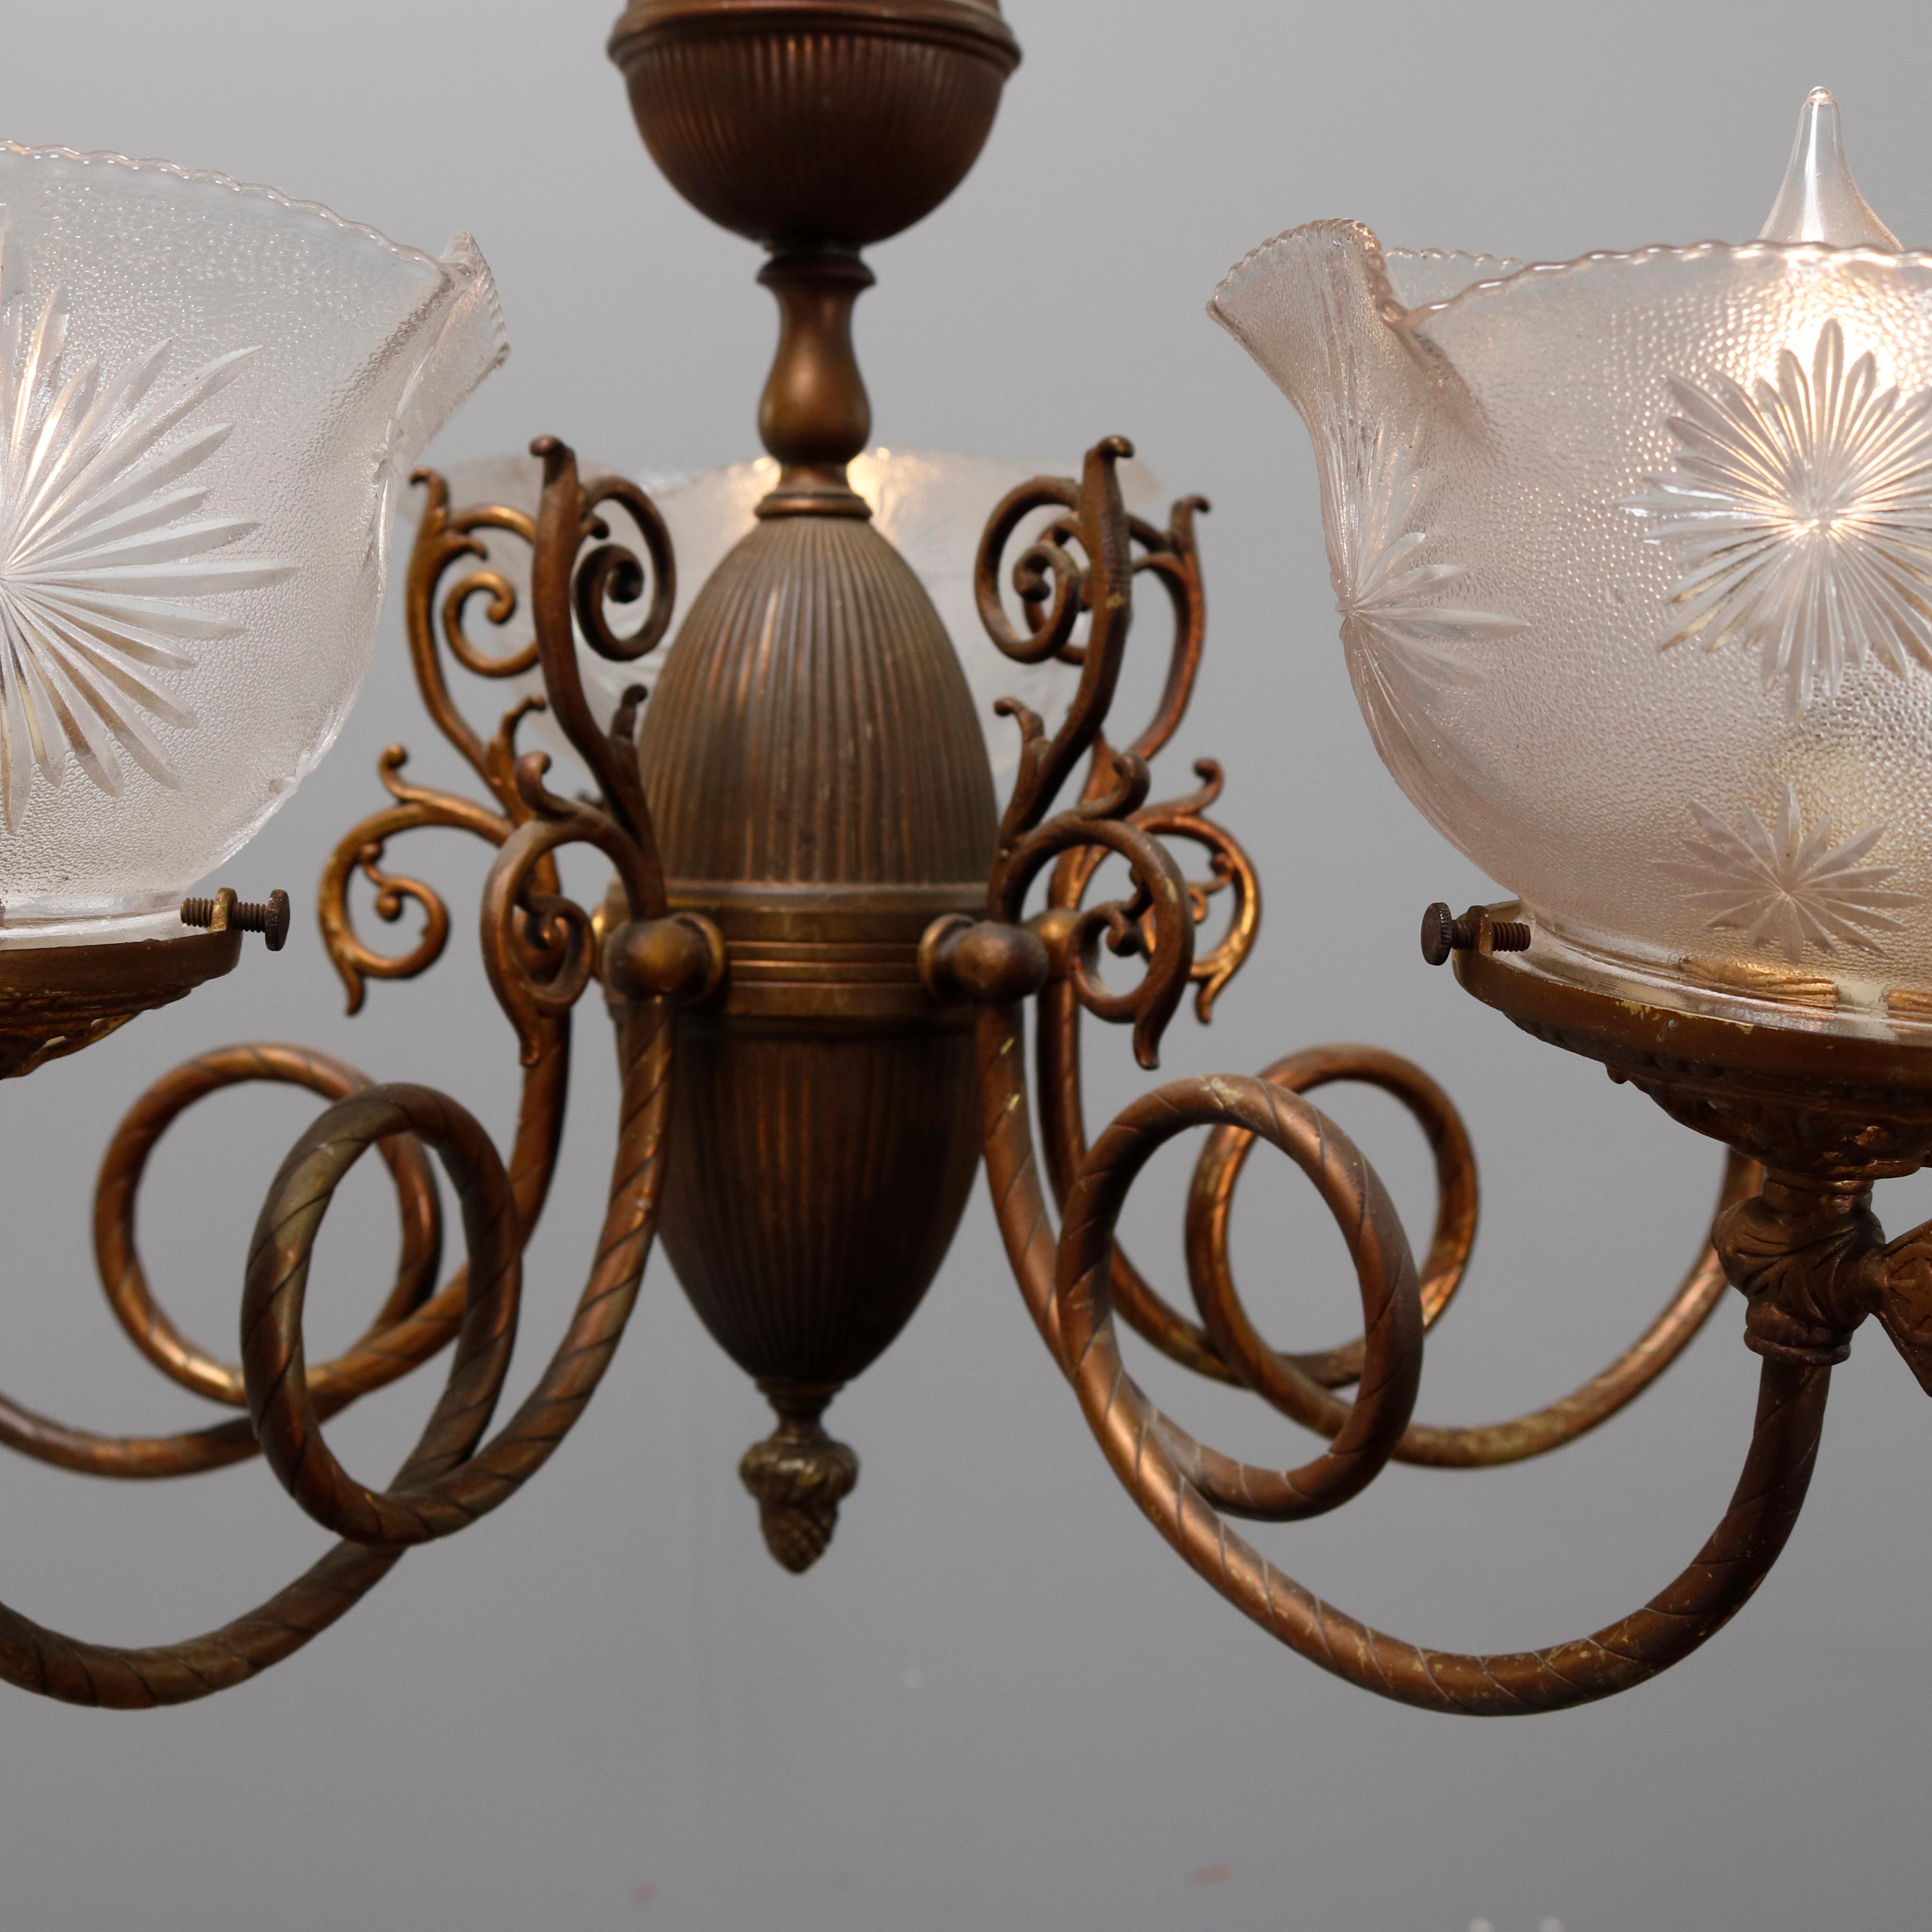 An antique Victorian electrified gas chandelier offers brass construction with urn form font with acorn drop finial and having five scroll arms terminating in candle lights with ruffled rim glass shades, circa 1890

Measures: 26